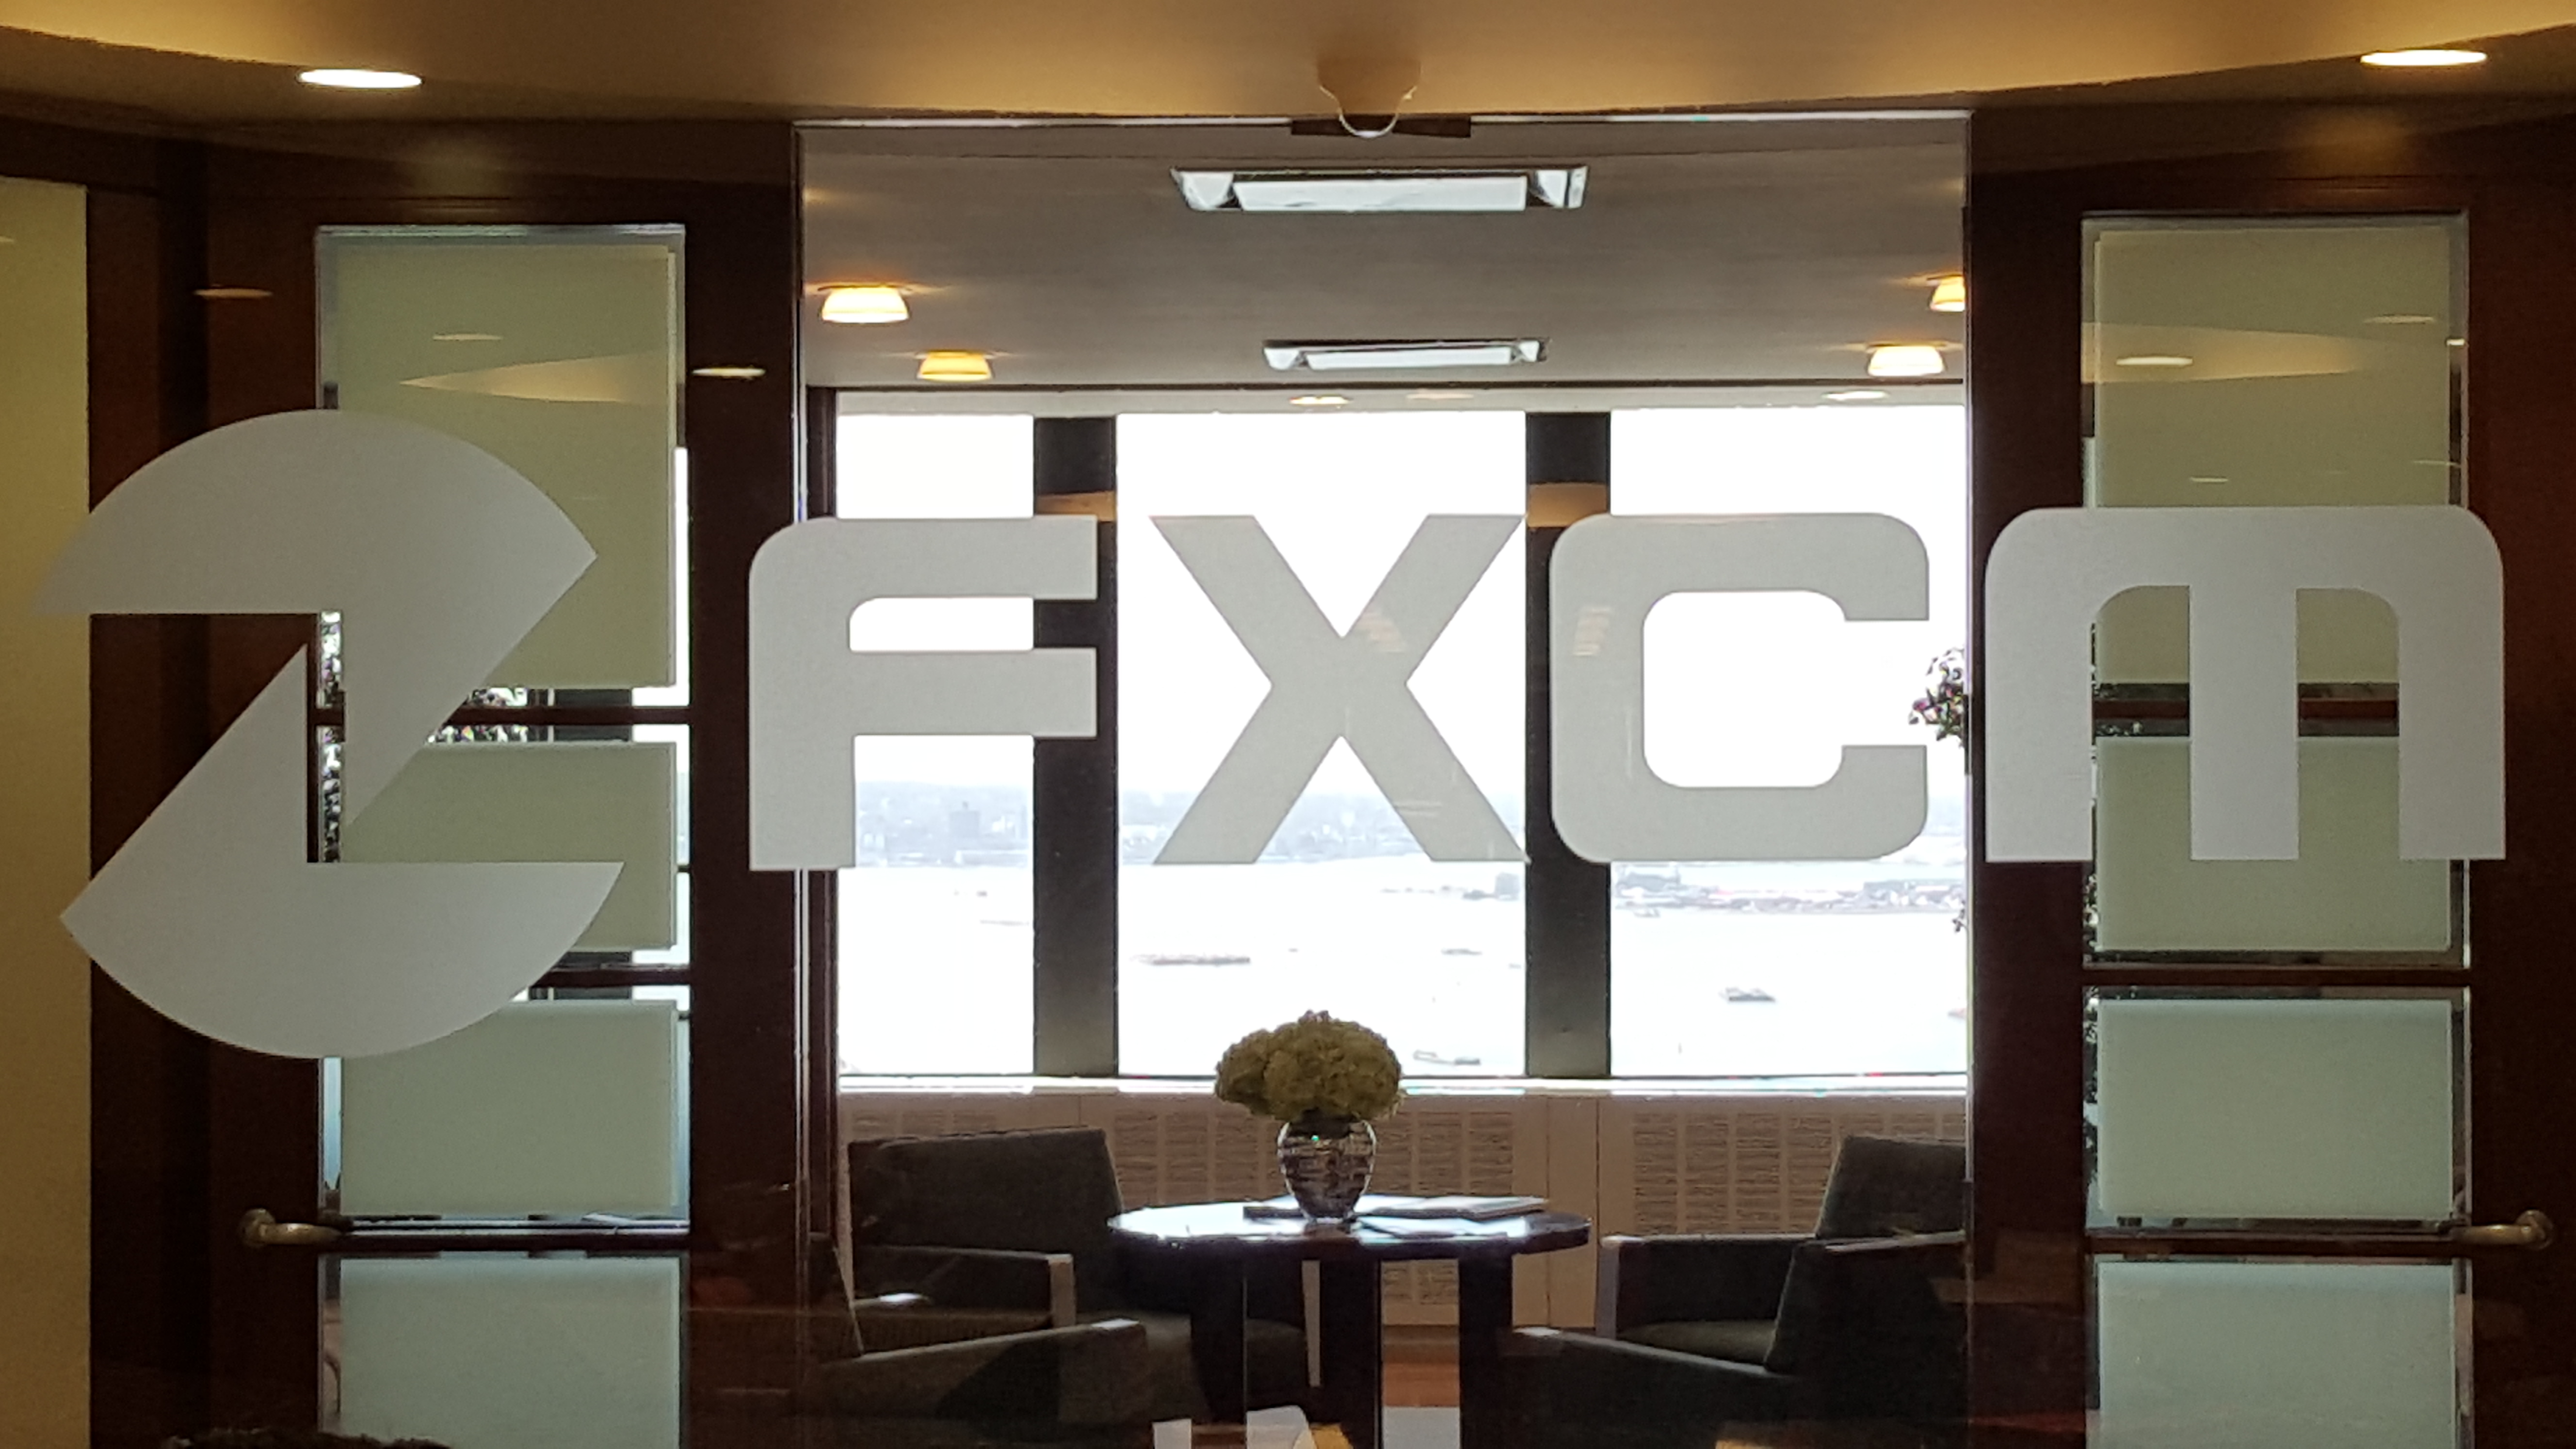 FXCM States Global Brokerage Delisting Issues Have No Impact